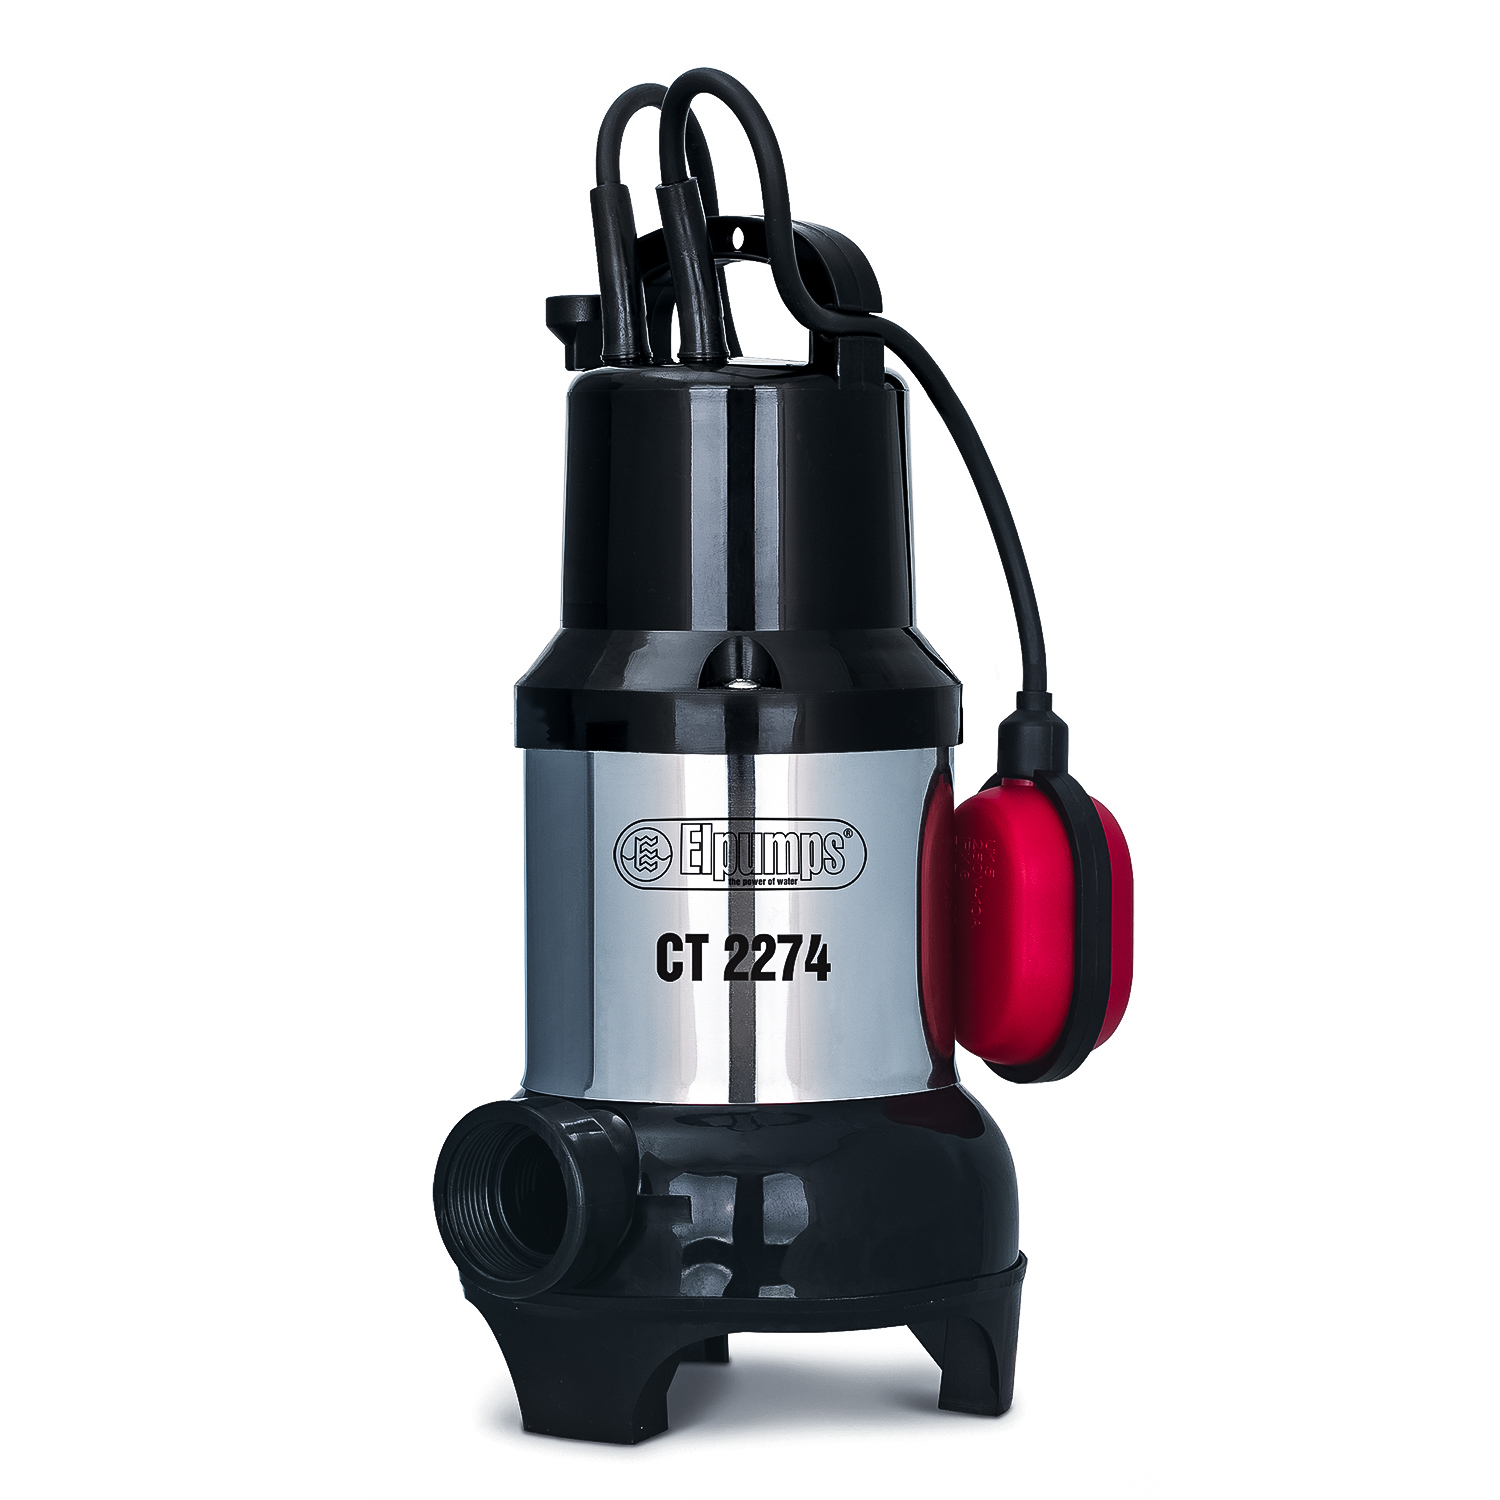 CT 2274 Submersible pumps for sewage